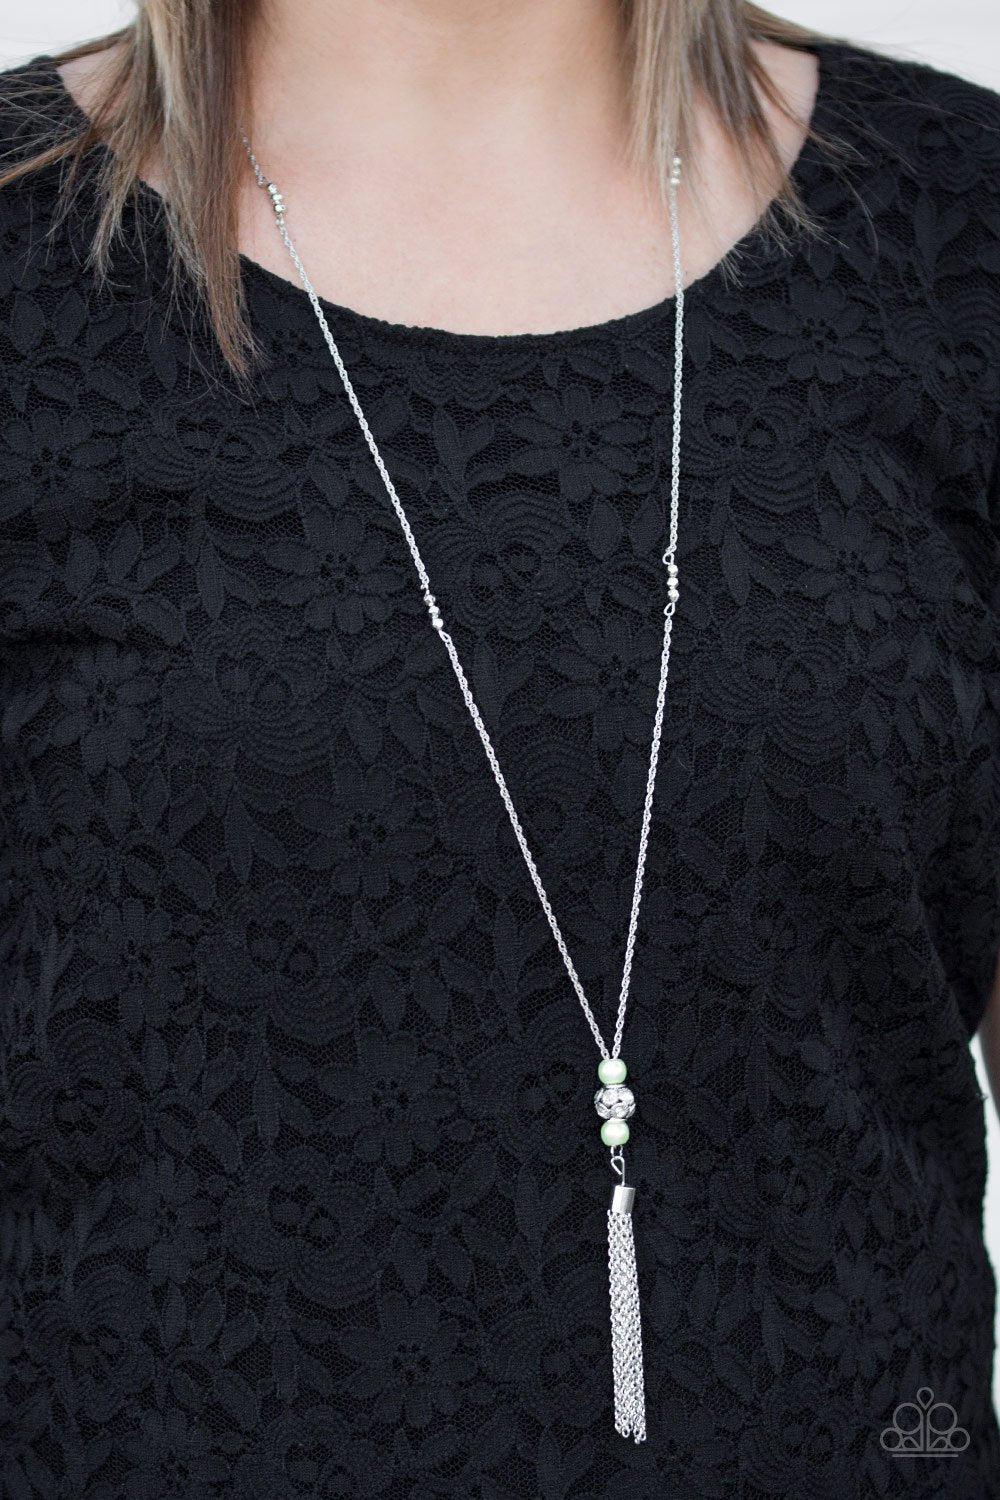 Century Shine Green Necklace - Paparazzi Accessories - model -CarasShop.com - $5 Jewelry by Cara Jewels